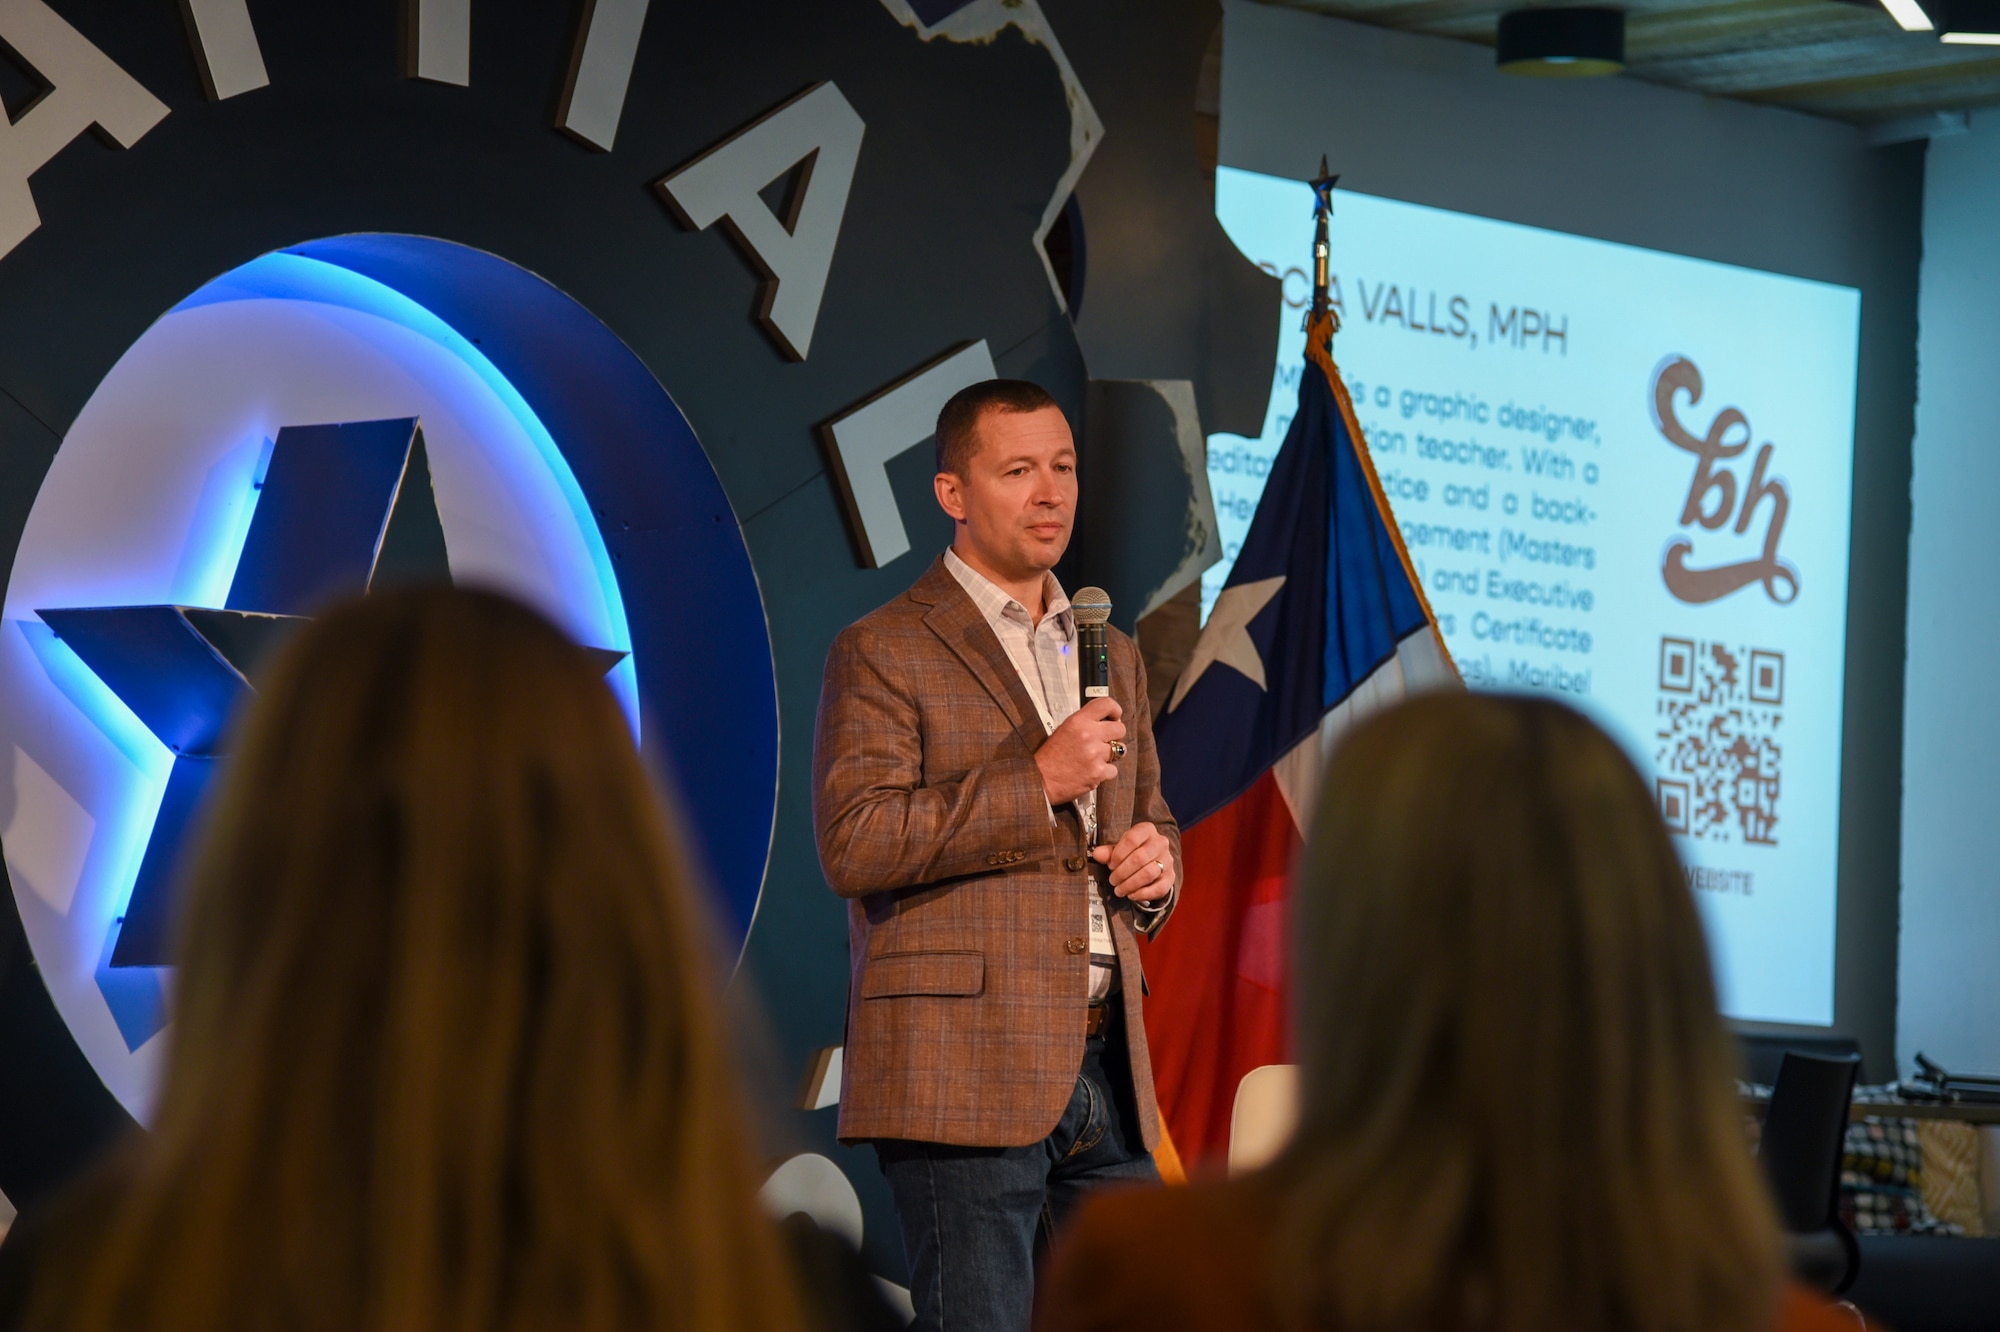 Col. Elliott Leigh, AFWERX director and chief commercialization officer for the Department of the Air Force, kicks off Fed Supernova with 22 minutes of wellness at Capital Factory in Austin, Texas, Aug. 23, 2023. Leigh encourages everyone to take 22 minutes each day to focus on something that brings joy in their life. AFWERX invited Maribel Gabriel Valls, a meditation teacher, to lead a morning mindfulness session to create a lasting habit of self-care and improve long-term well-being. (U.S. Air Force photo by Matthew Clouse)